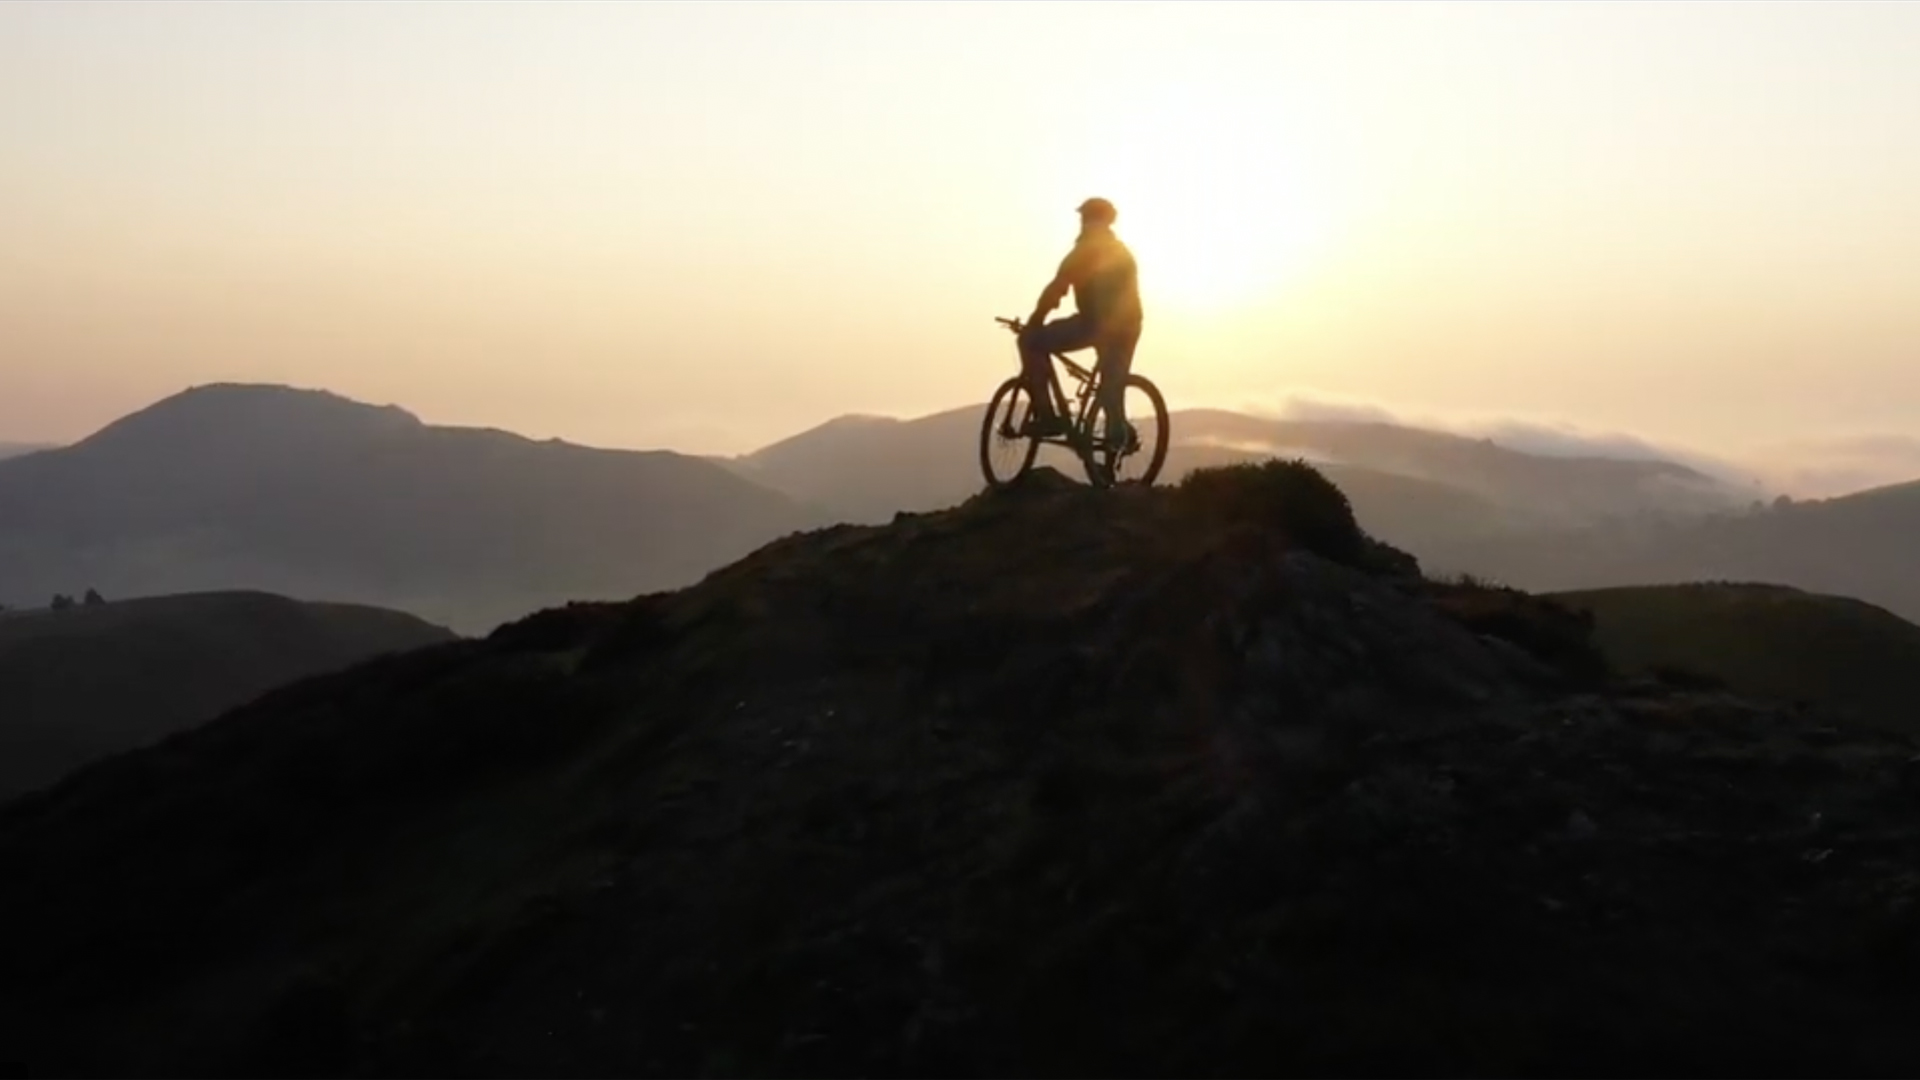 A person on a bicycle at the top of a hillside